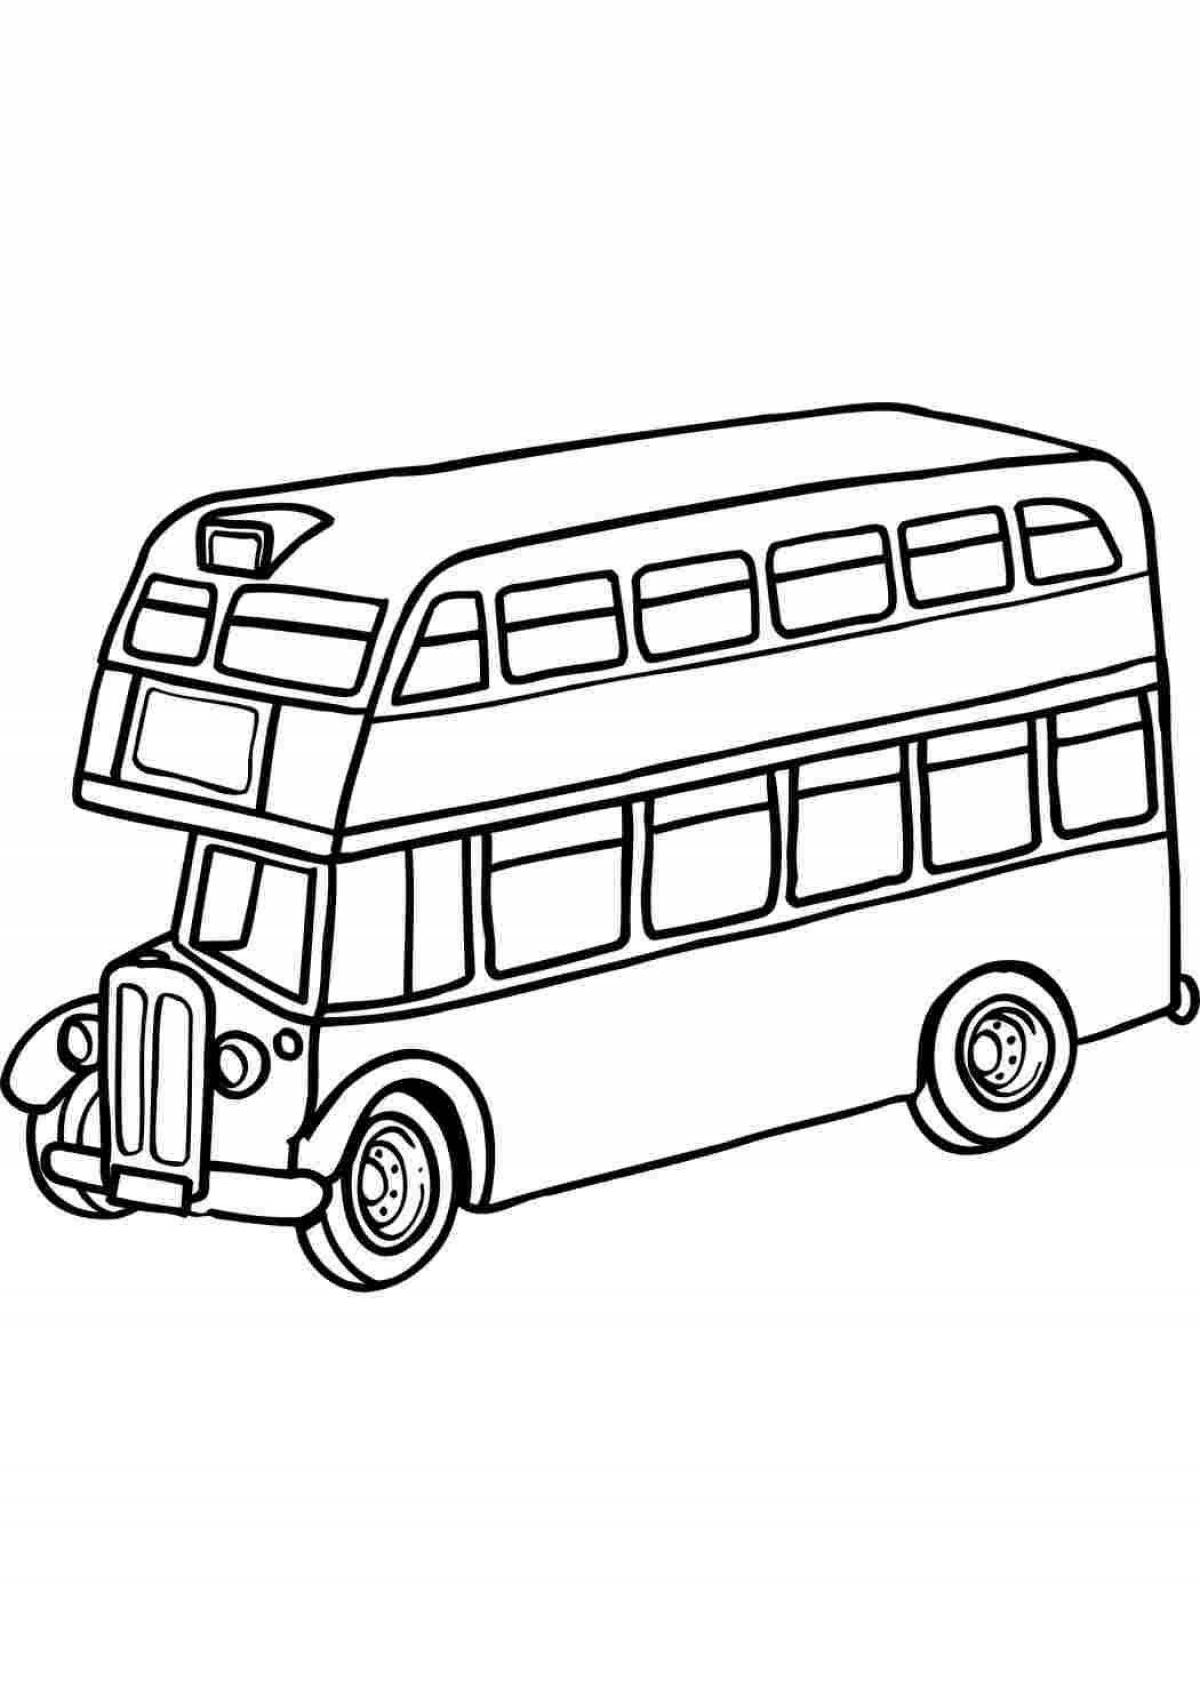 Colorful bus coloring book for 4-5 year olds